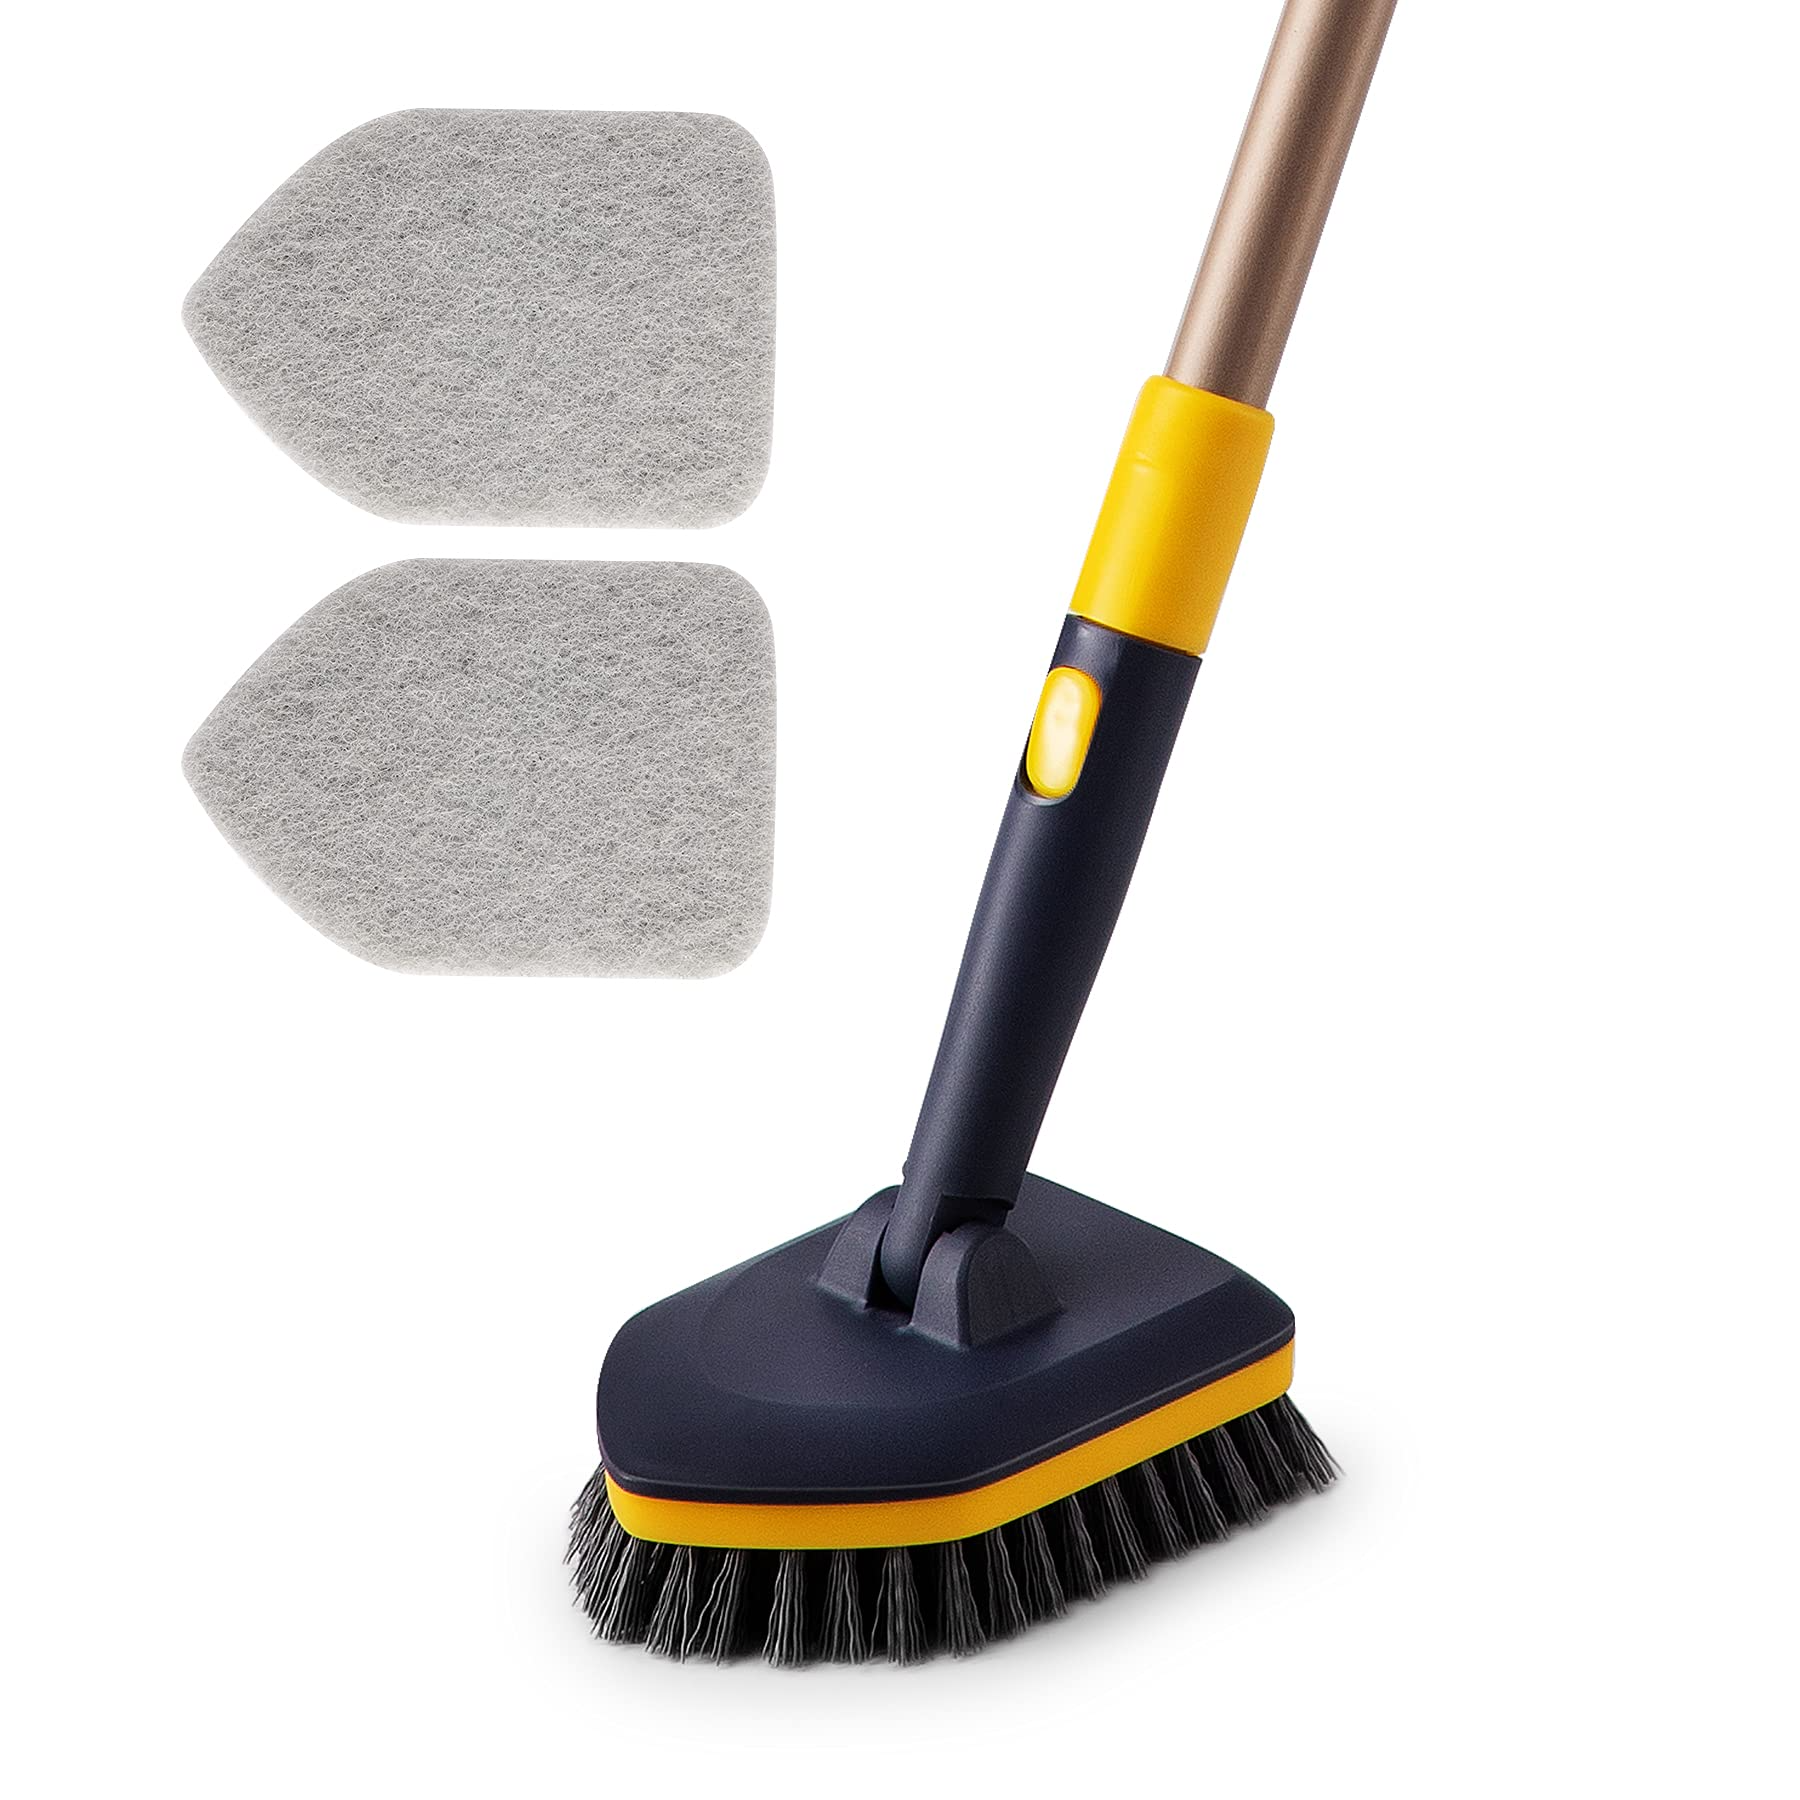 Shower Cleaning Brush 2 in 1 Tub and Tile Scrubber Brush 46